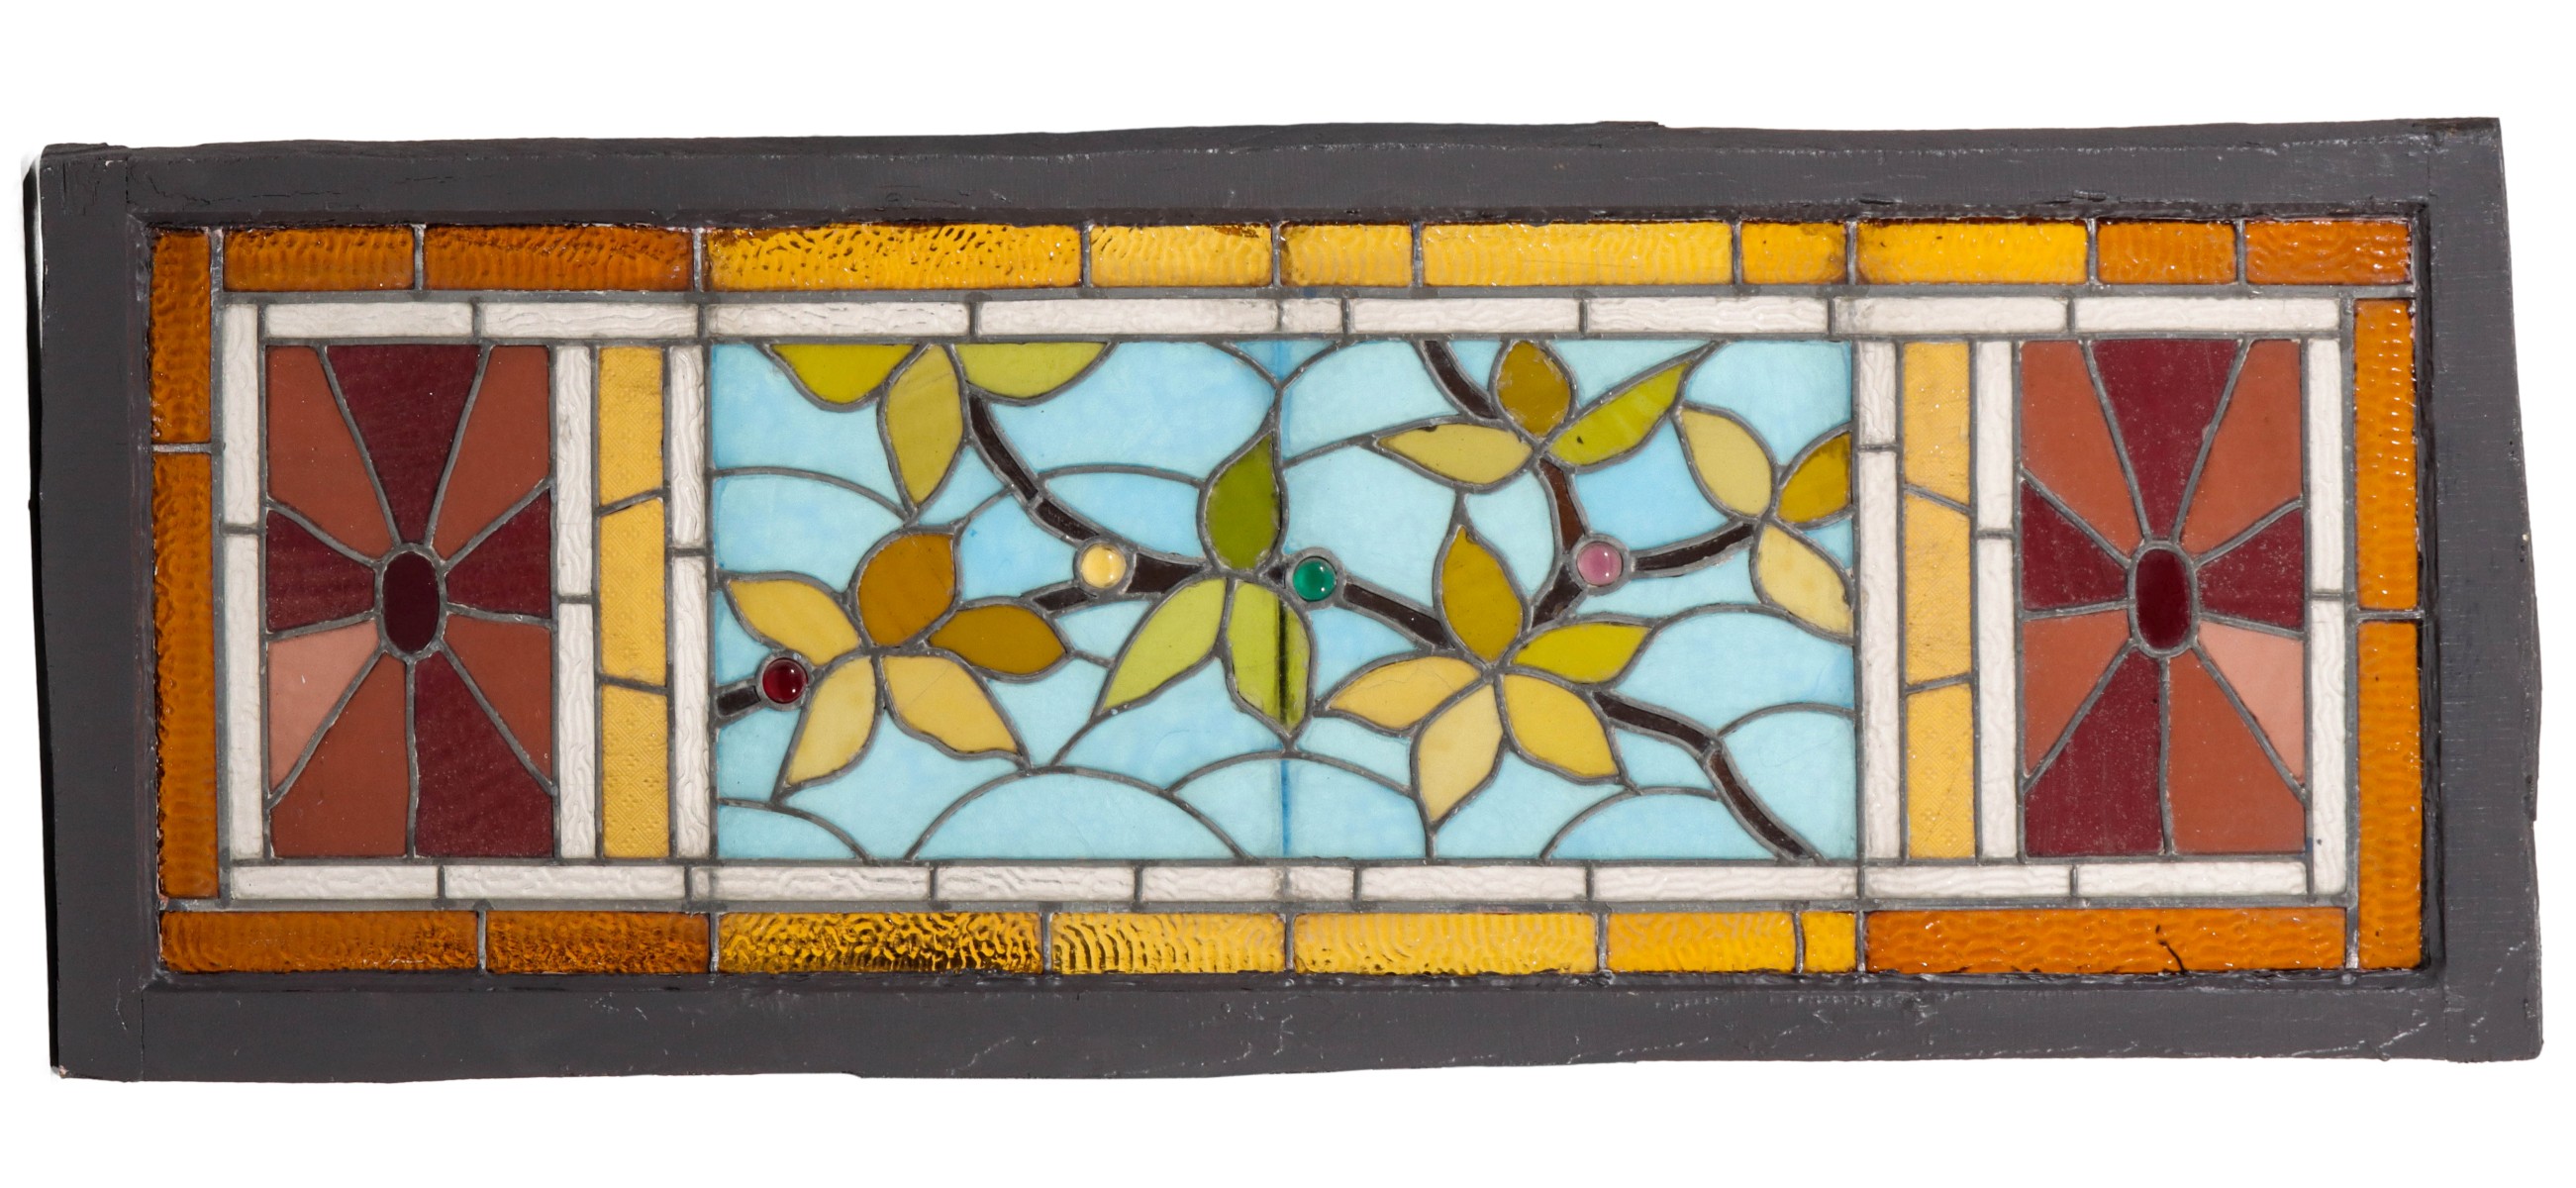 A 12-COLOR STAINED AND LEADED GLASS WINDOW WITH JEWELS